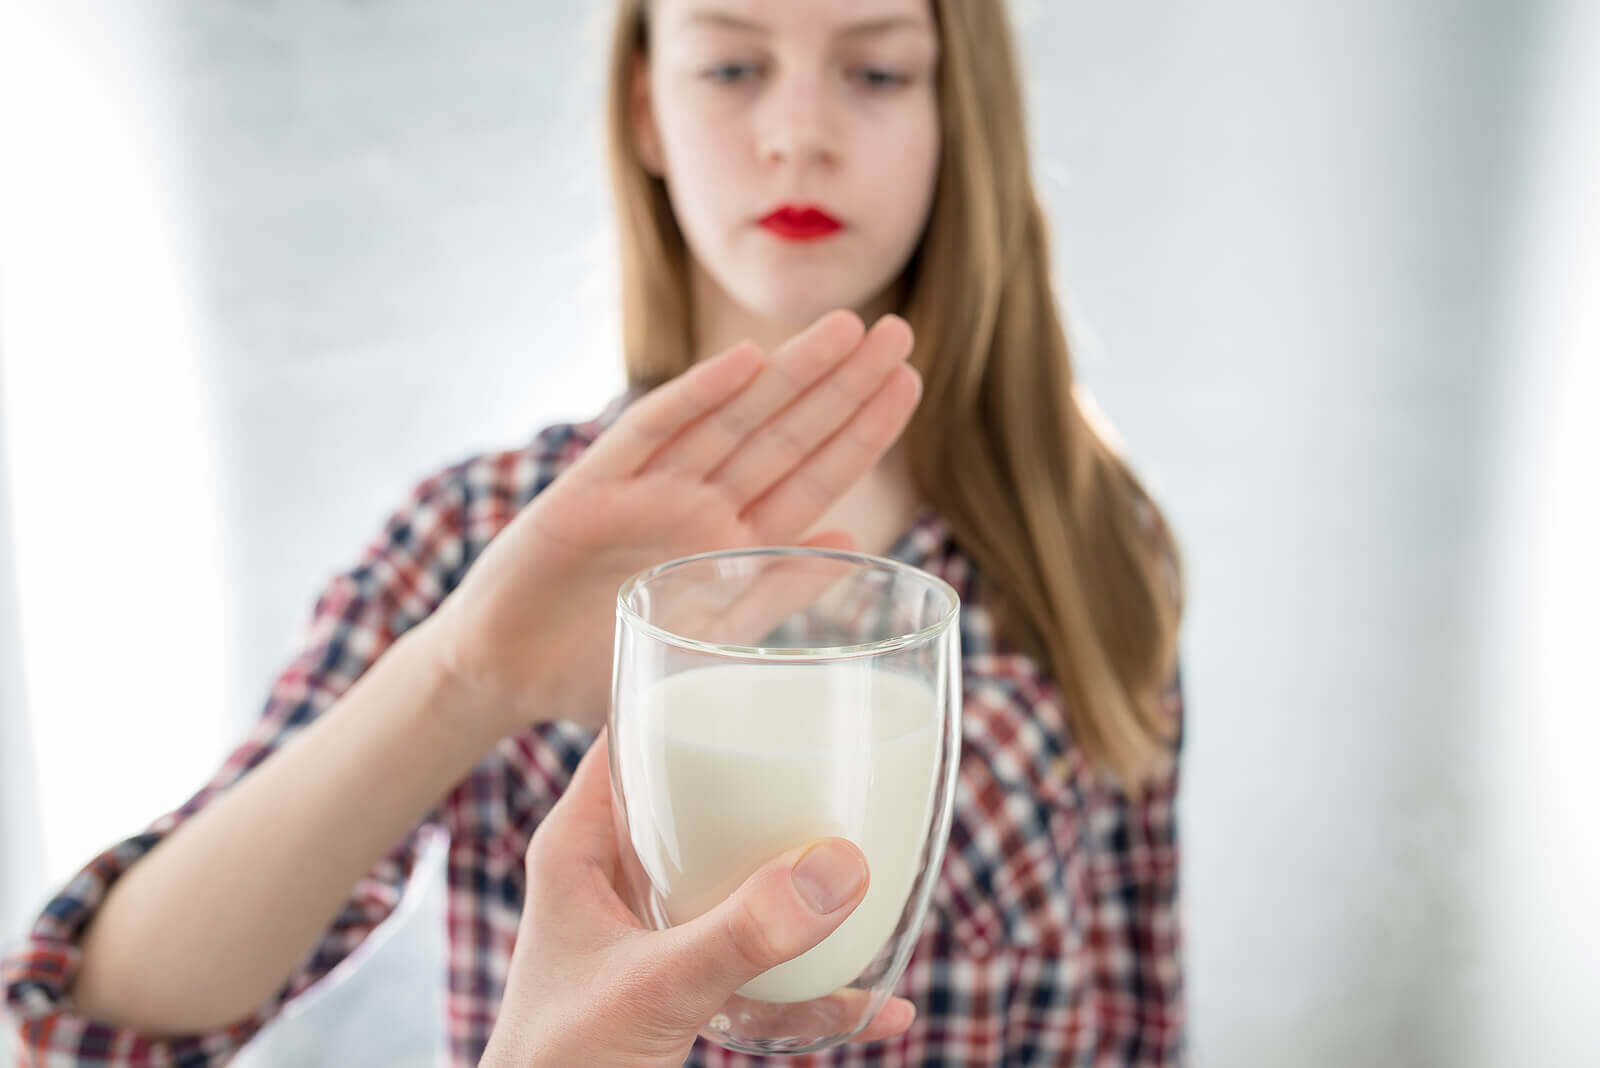 A woman who suffers from lactose intolerance.